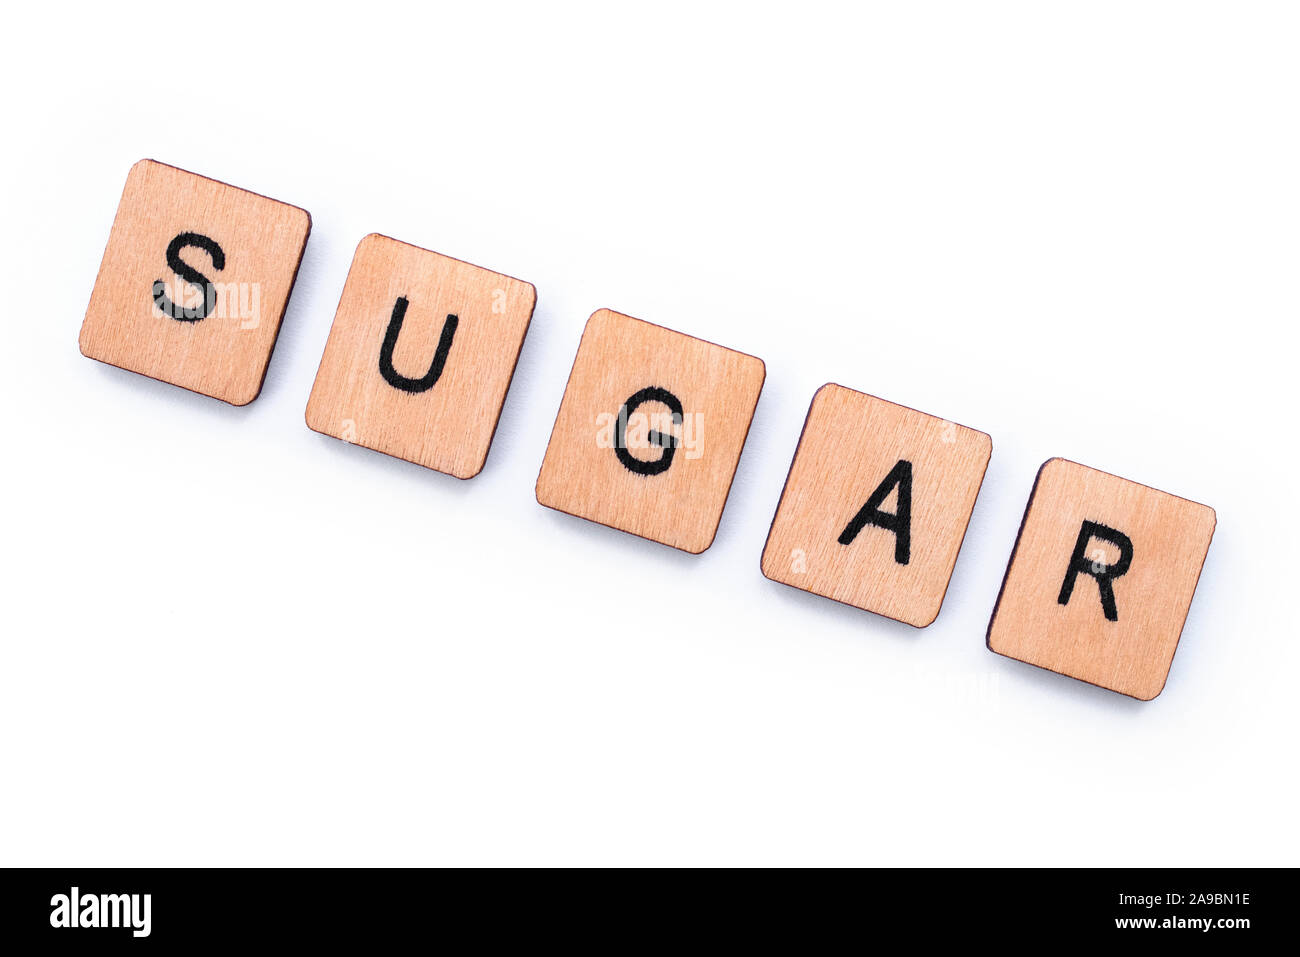 The word SUGAR, spelt with wooden letter tiles over a white background. Stock Photo